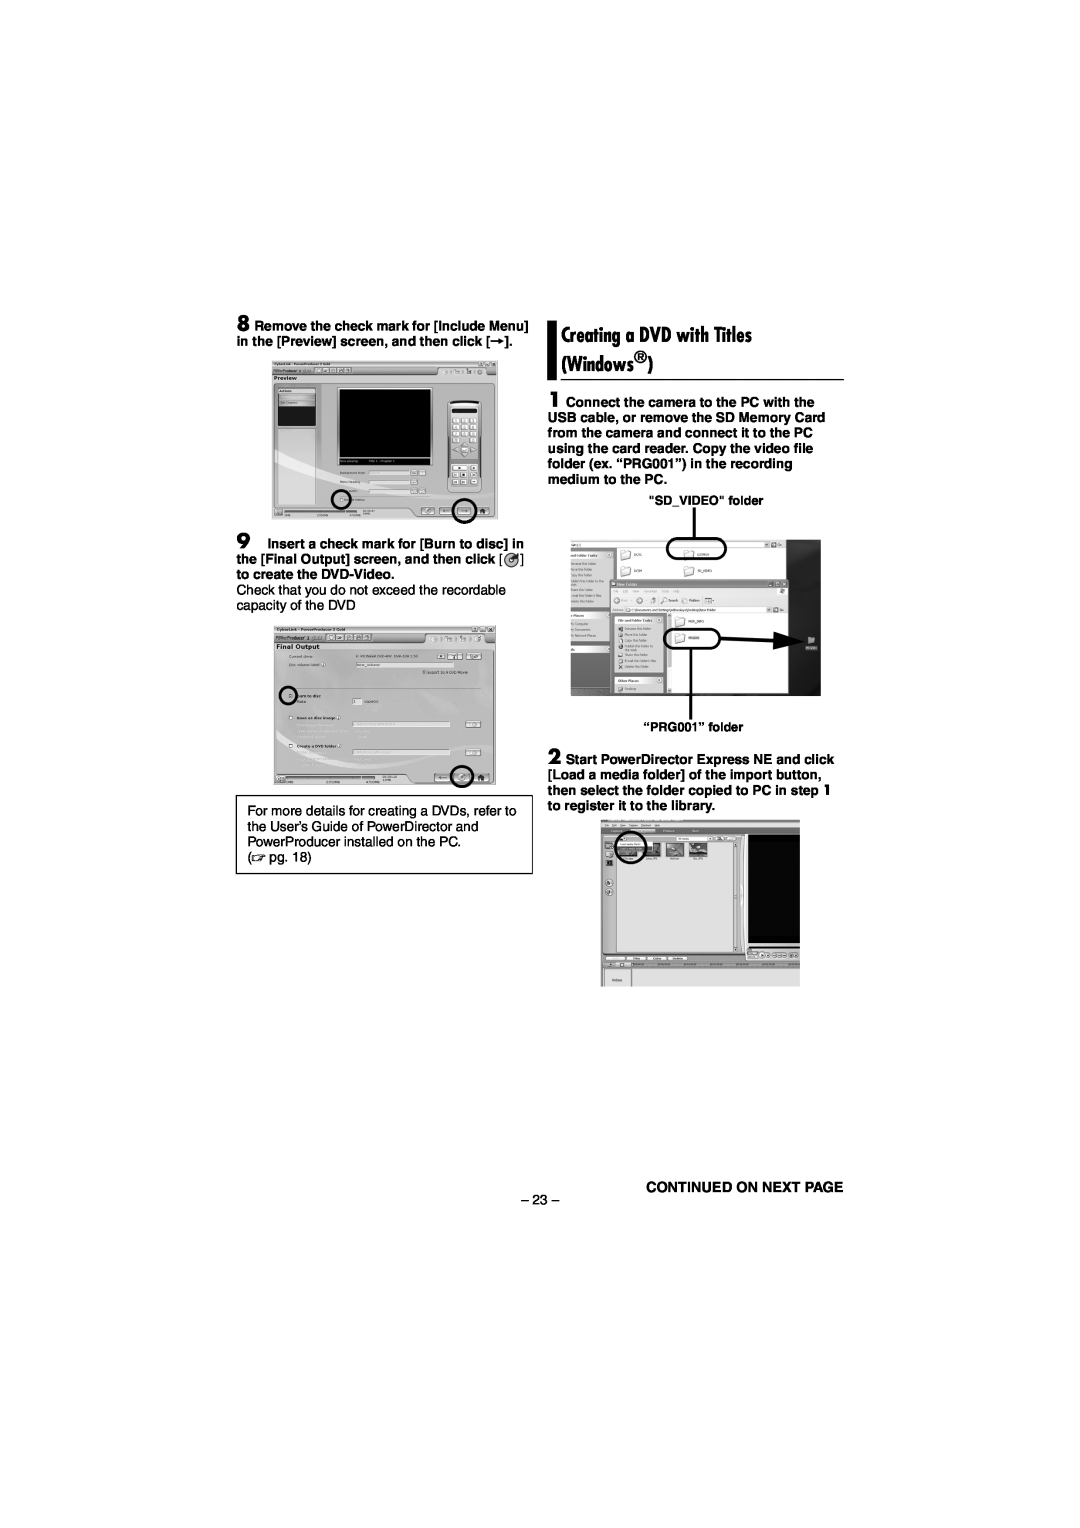 JVC GZ-MG70AH, GZ-MG70AS, GZ-MG70AA, GZ-MG70AG, LYT1496-001A Creating a DVD with Titles Windows, Continued On Next Page,  pg 